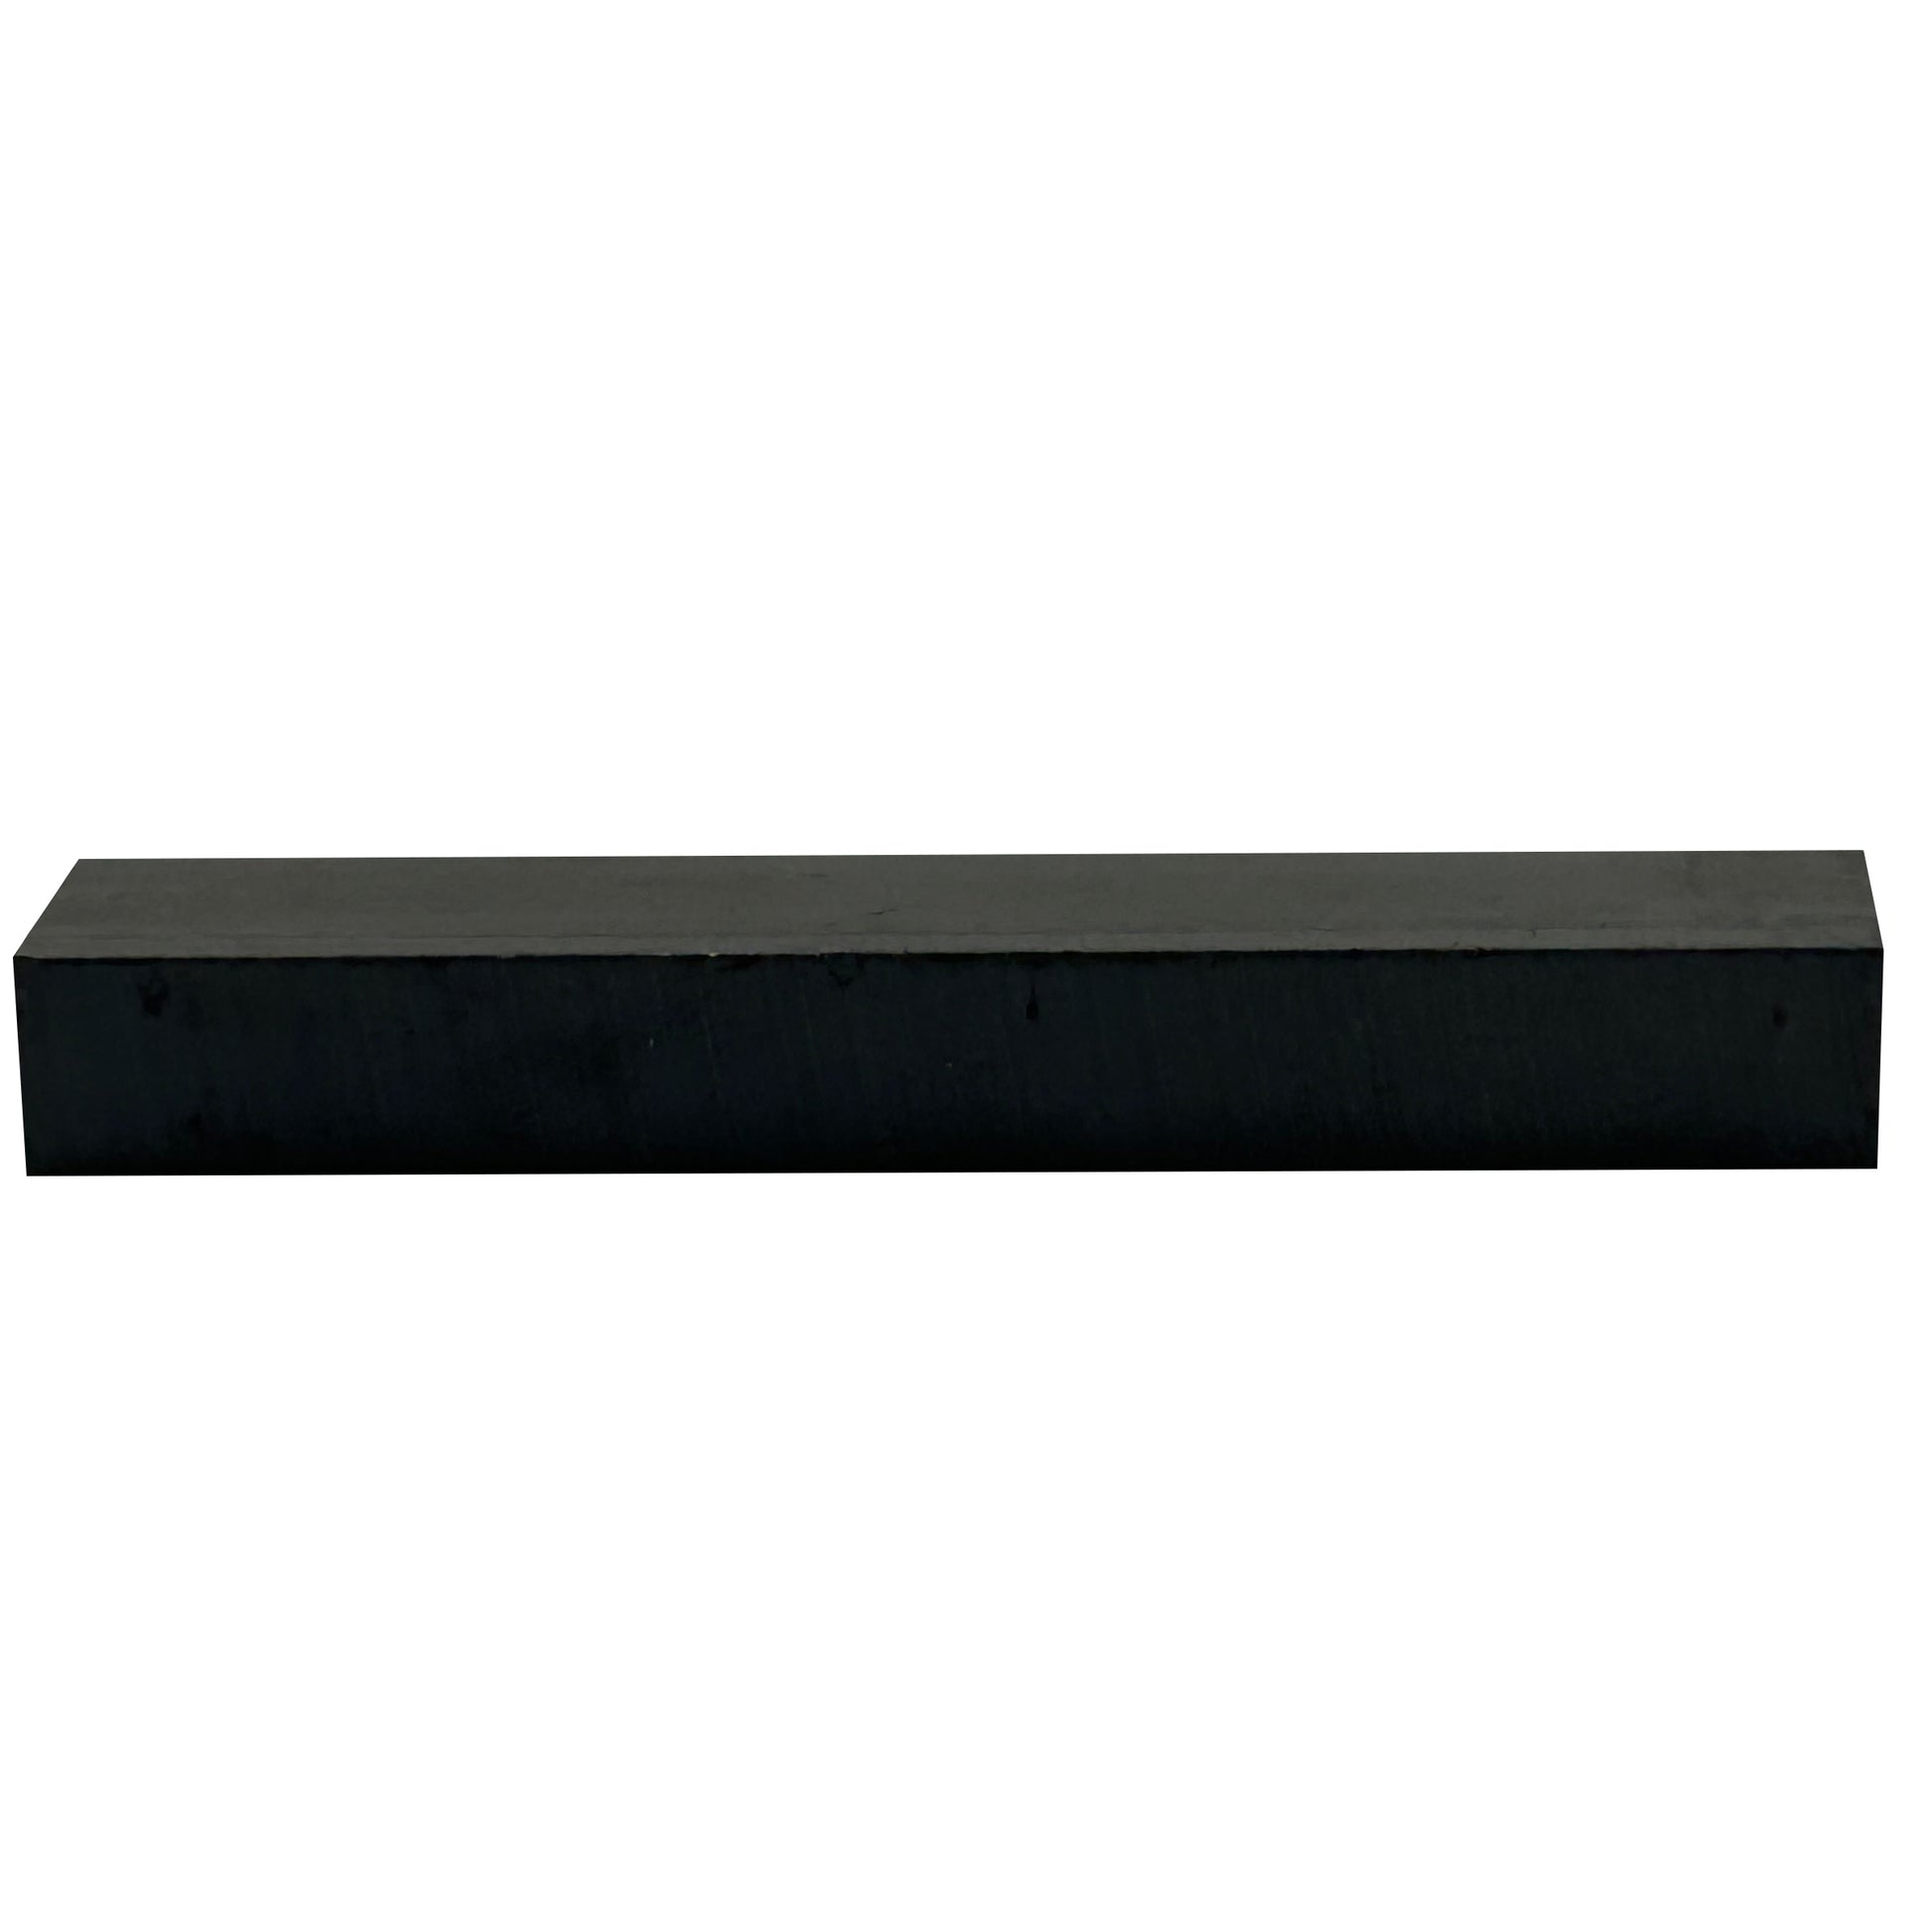 Load image into Gallery viewer, CB003910-S Ceramic Block Magnet - Side View